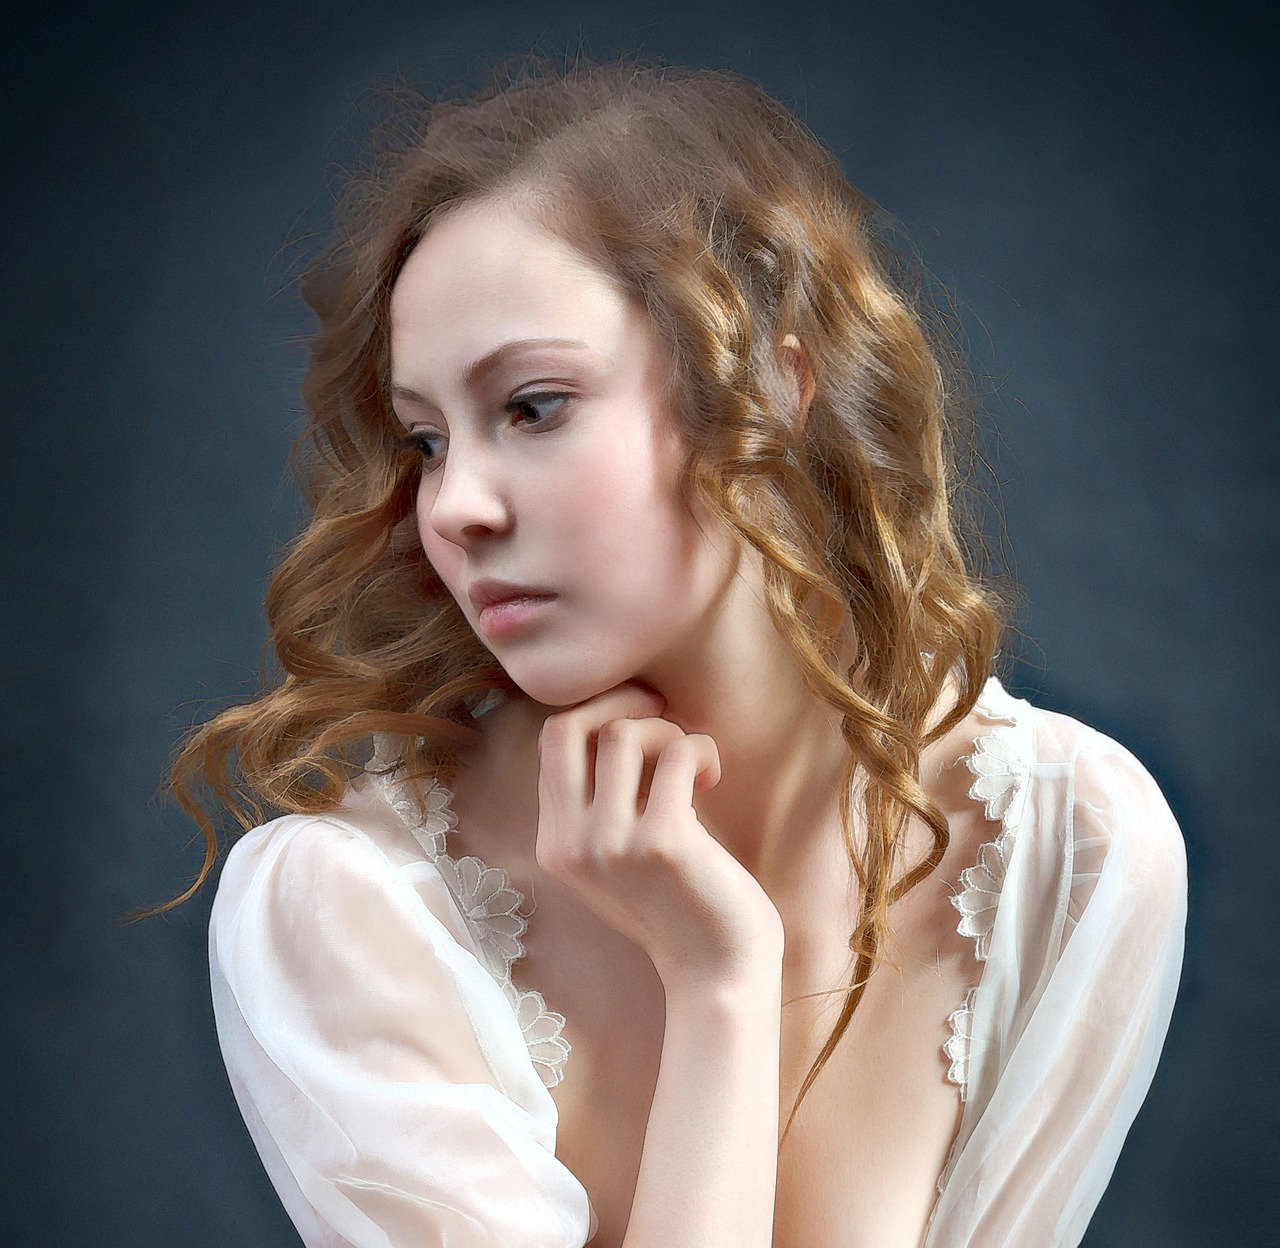 a woman in a white dress posing for a picture, a portrait, inspired by irakli nadar, shutterstock, romanticism, pale skin curly blond hair, depressed girl portrait, realistic portrait photo, 60mm portrait